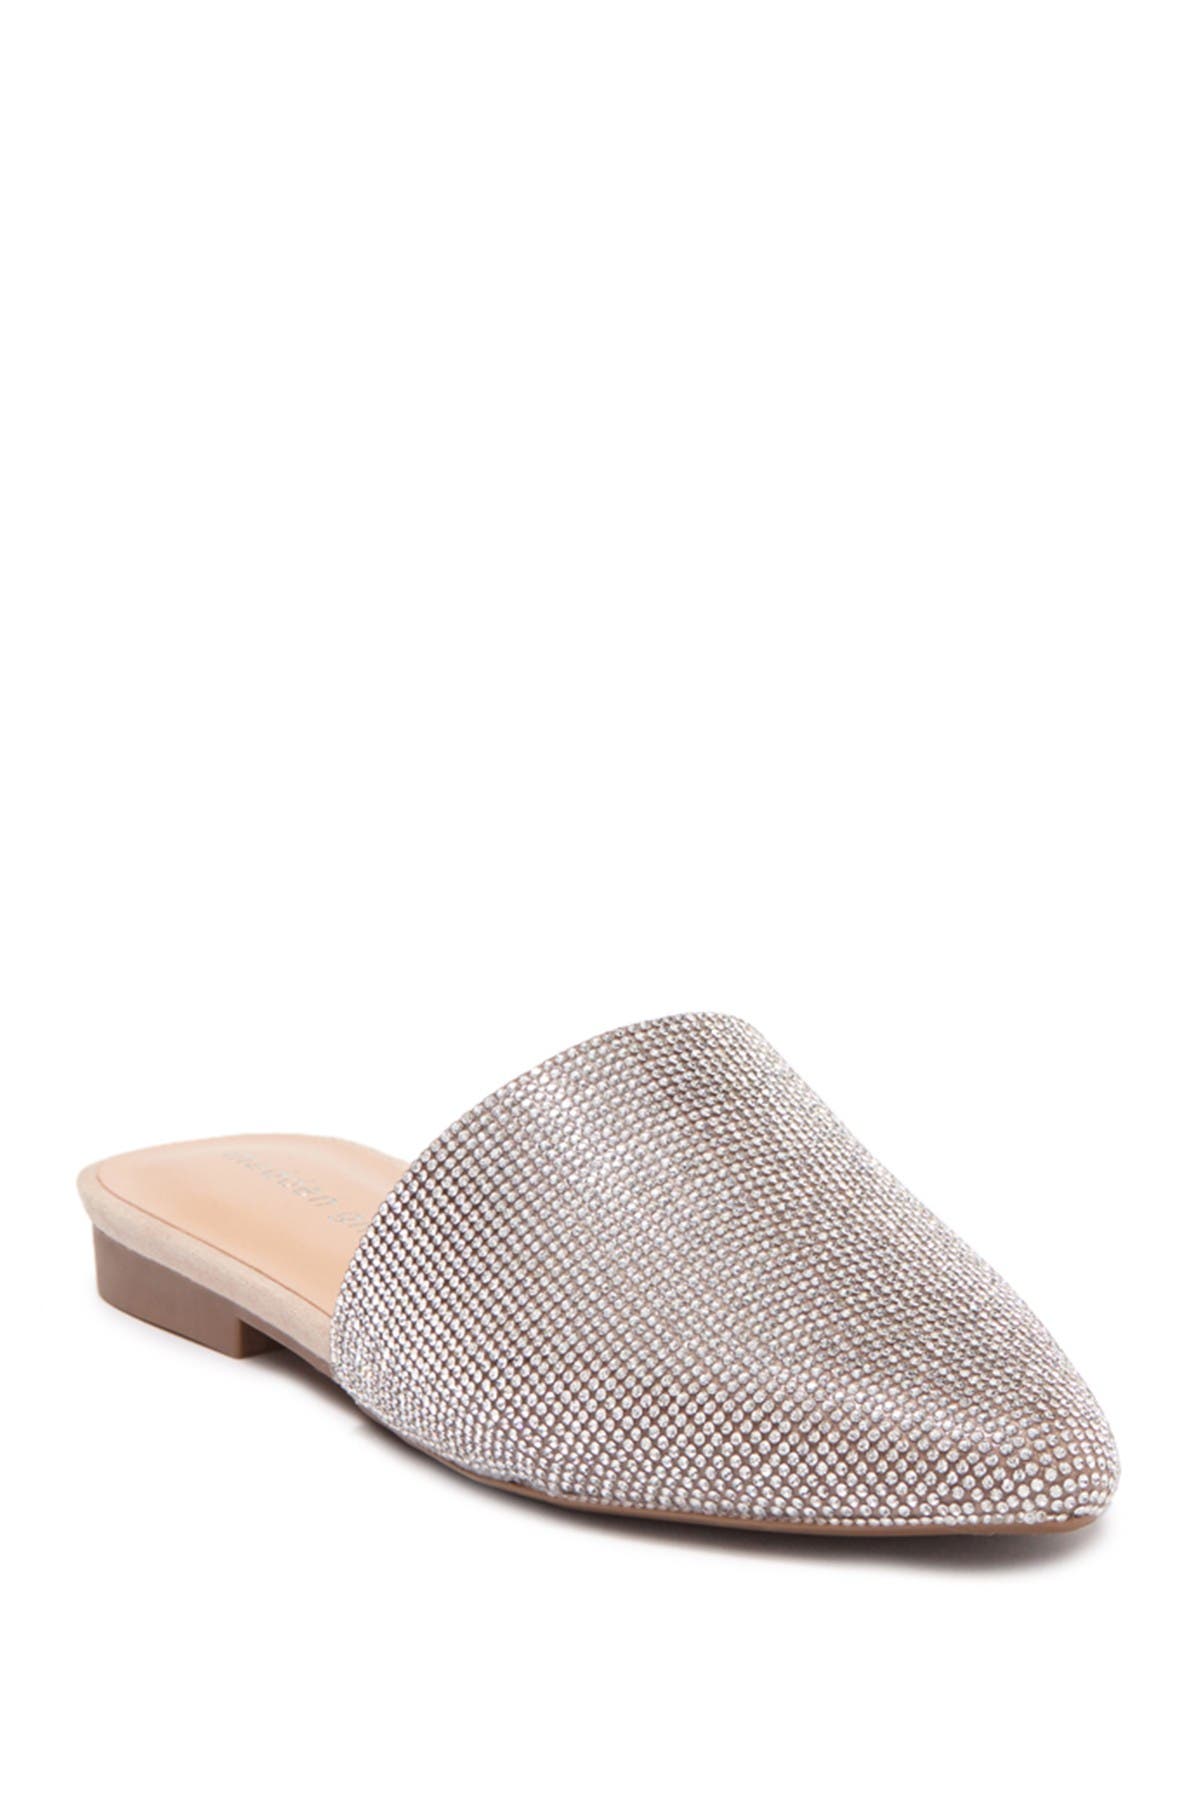 Madden Girl | Tania Pointed Toe Low 